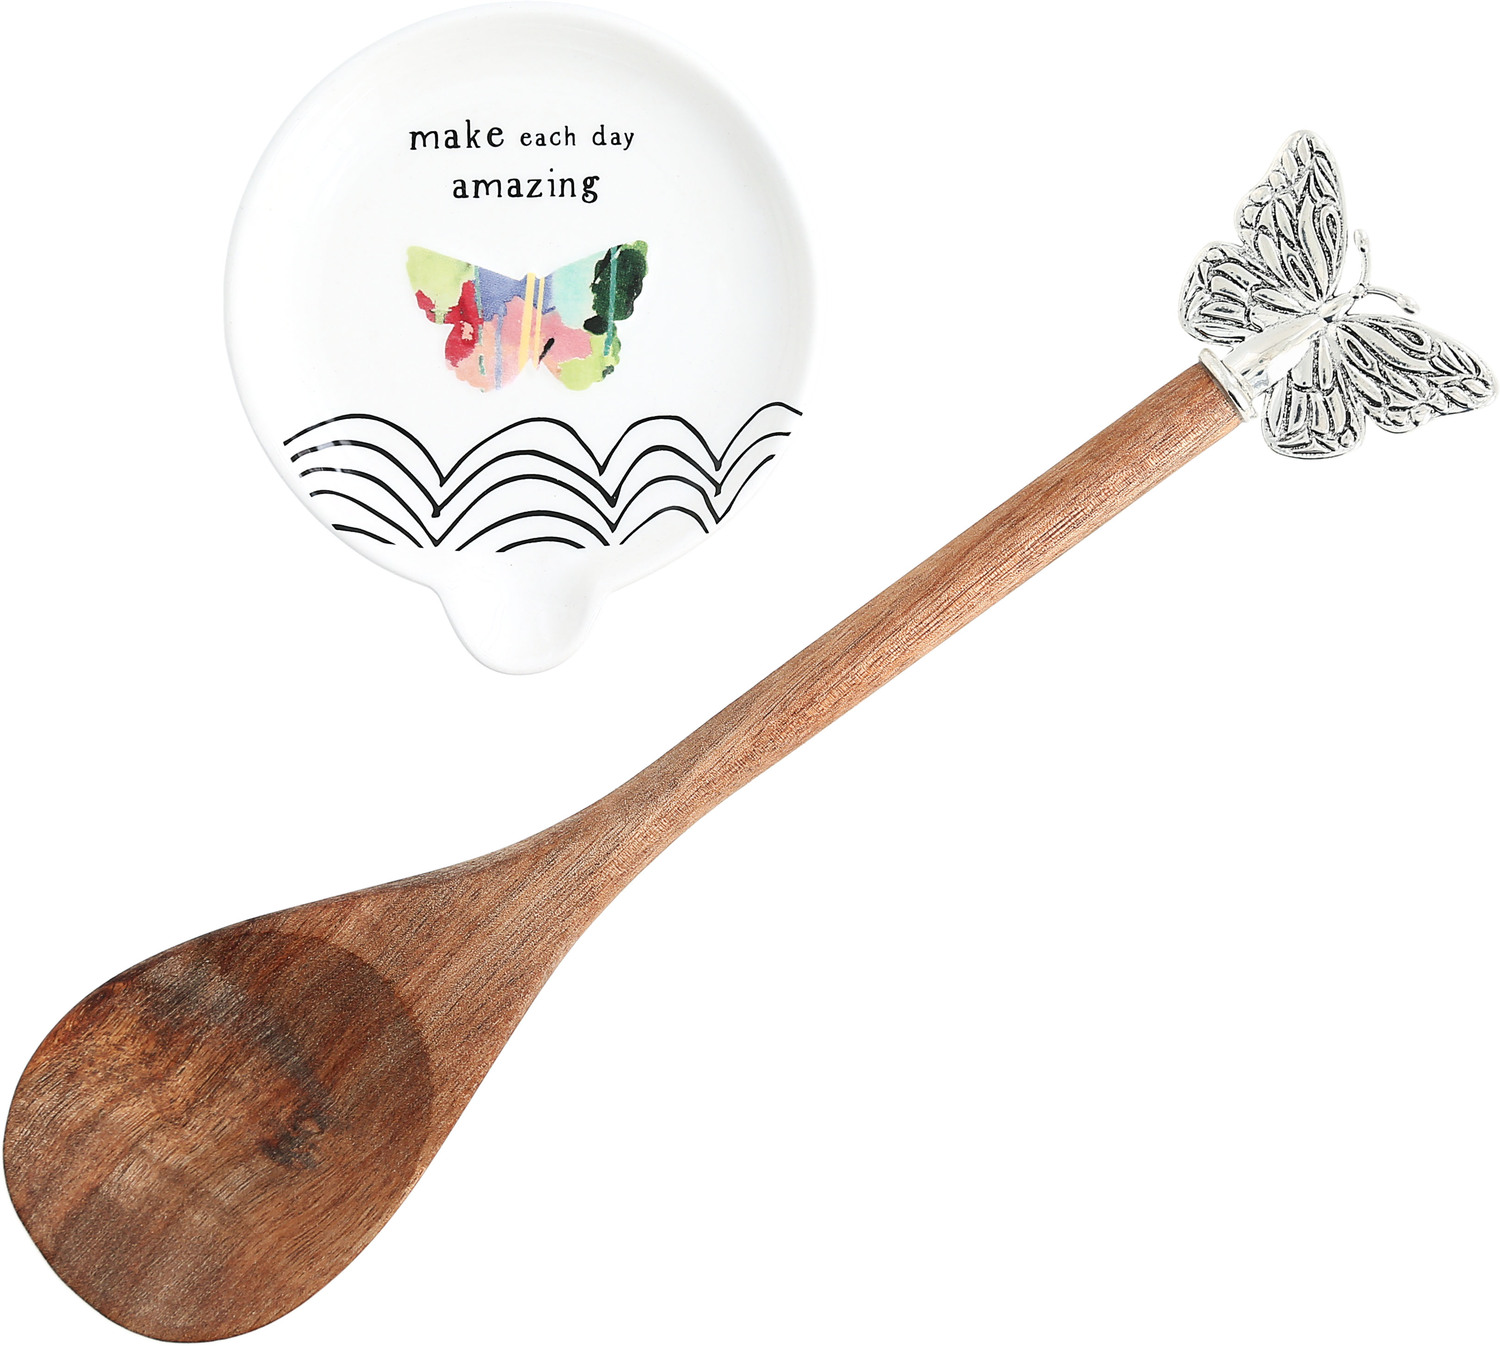 Amazing by Celebrating You - Amazing - 4" Spoon Rest with Decorative Bamboo Spoon